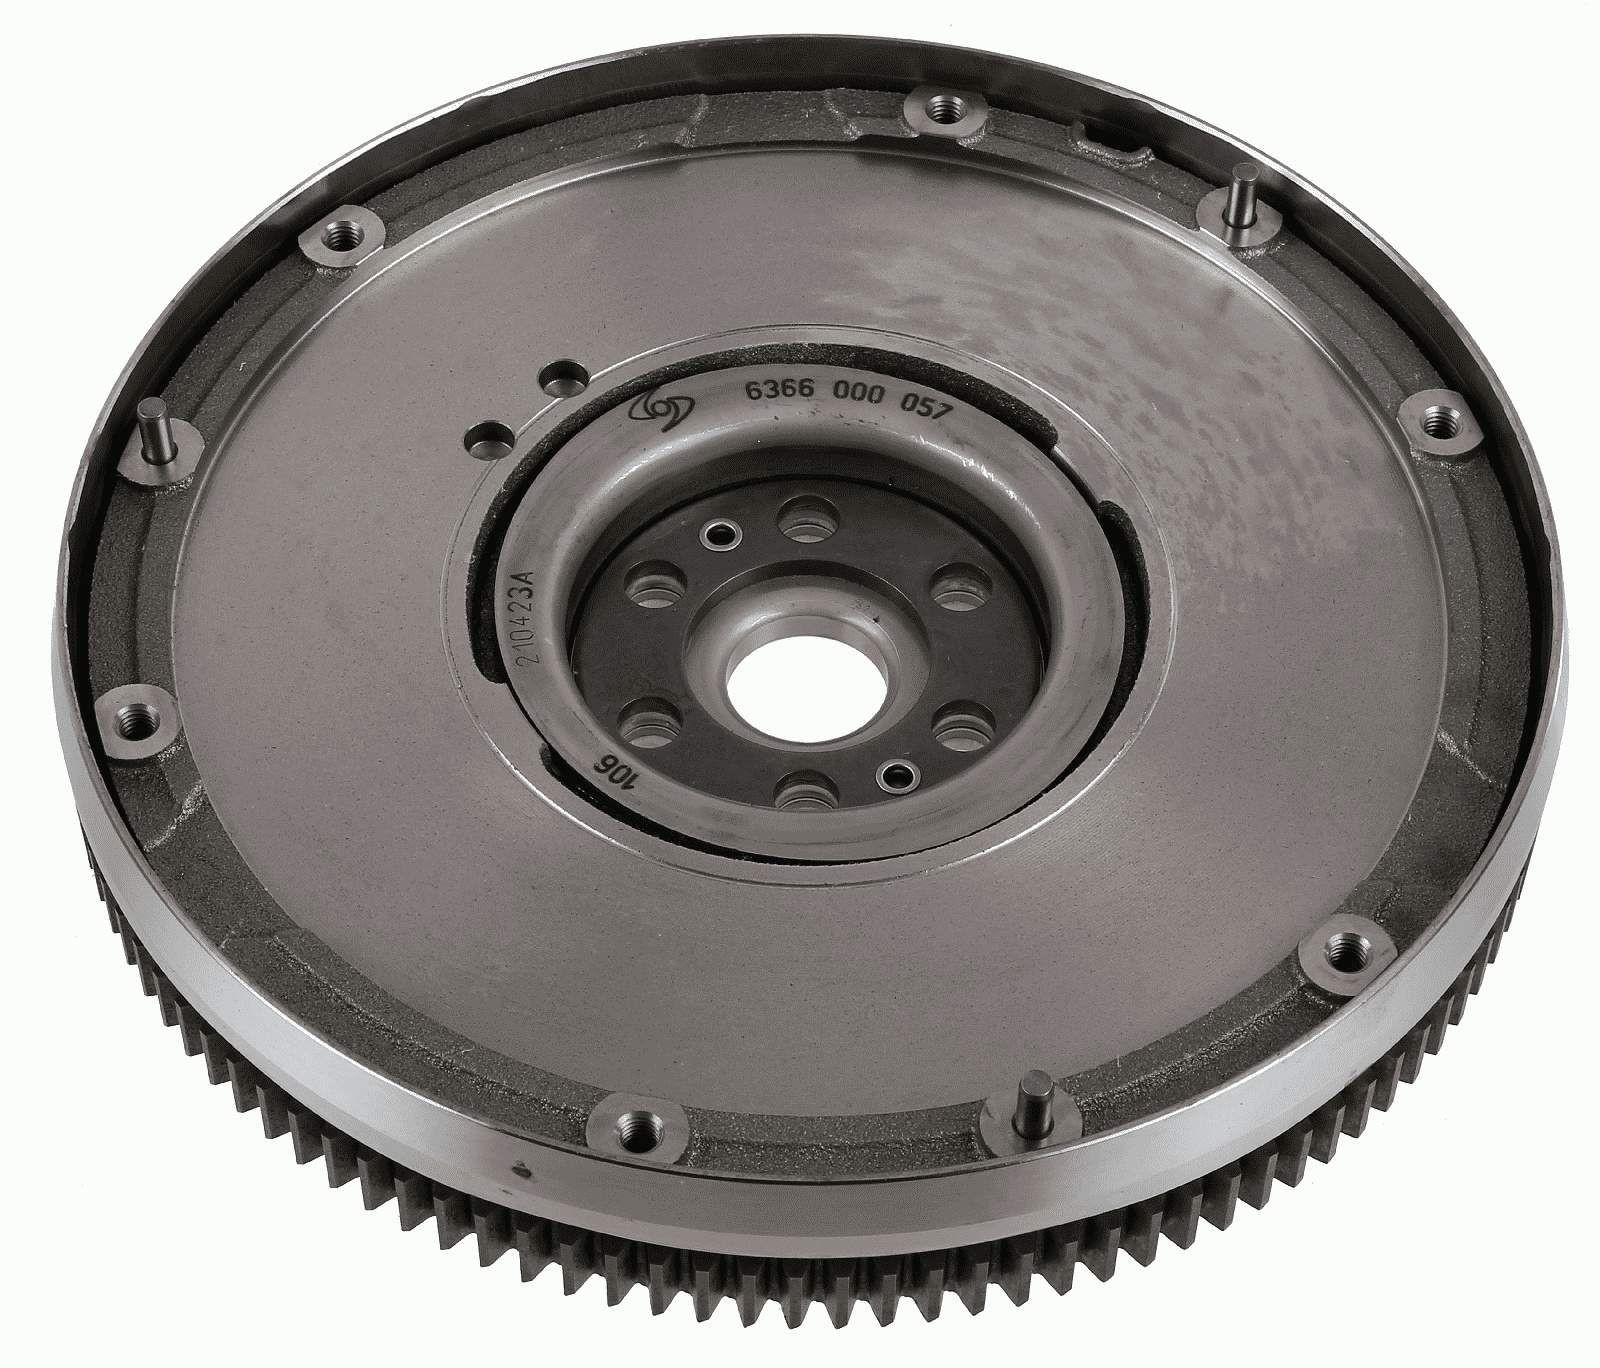 Great value for money - SACHS Flywheel 6366 000 057